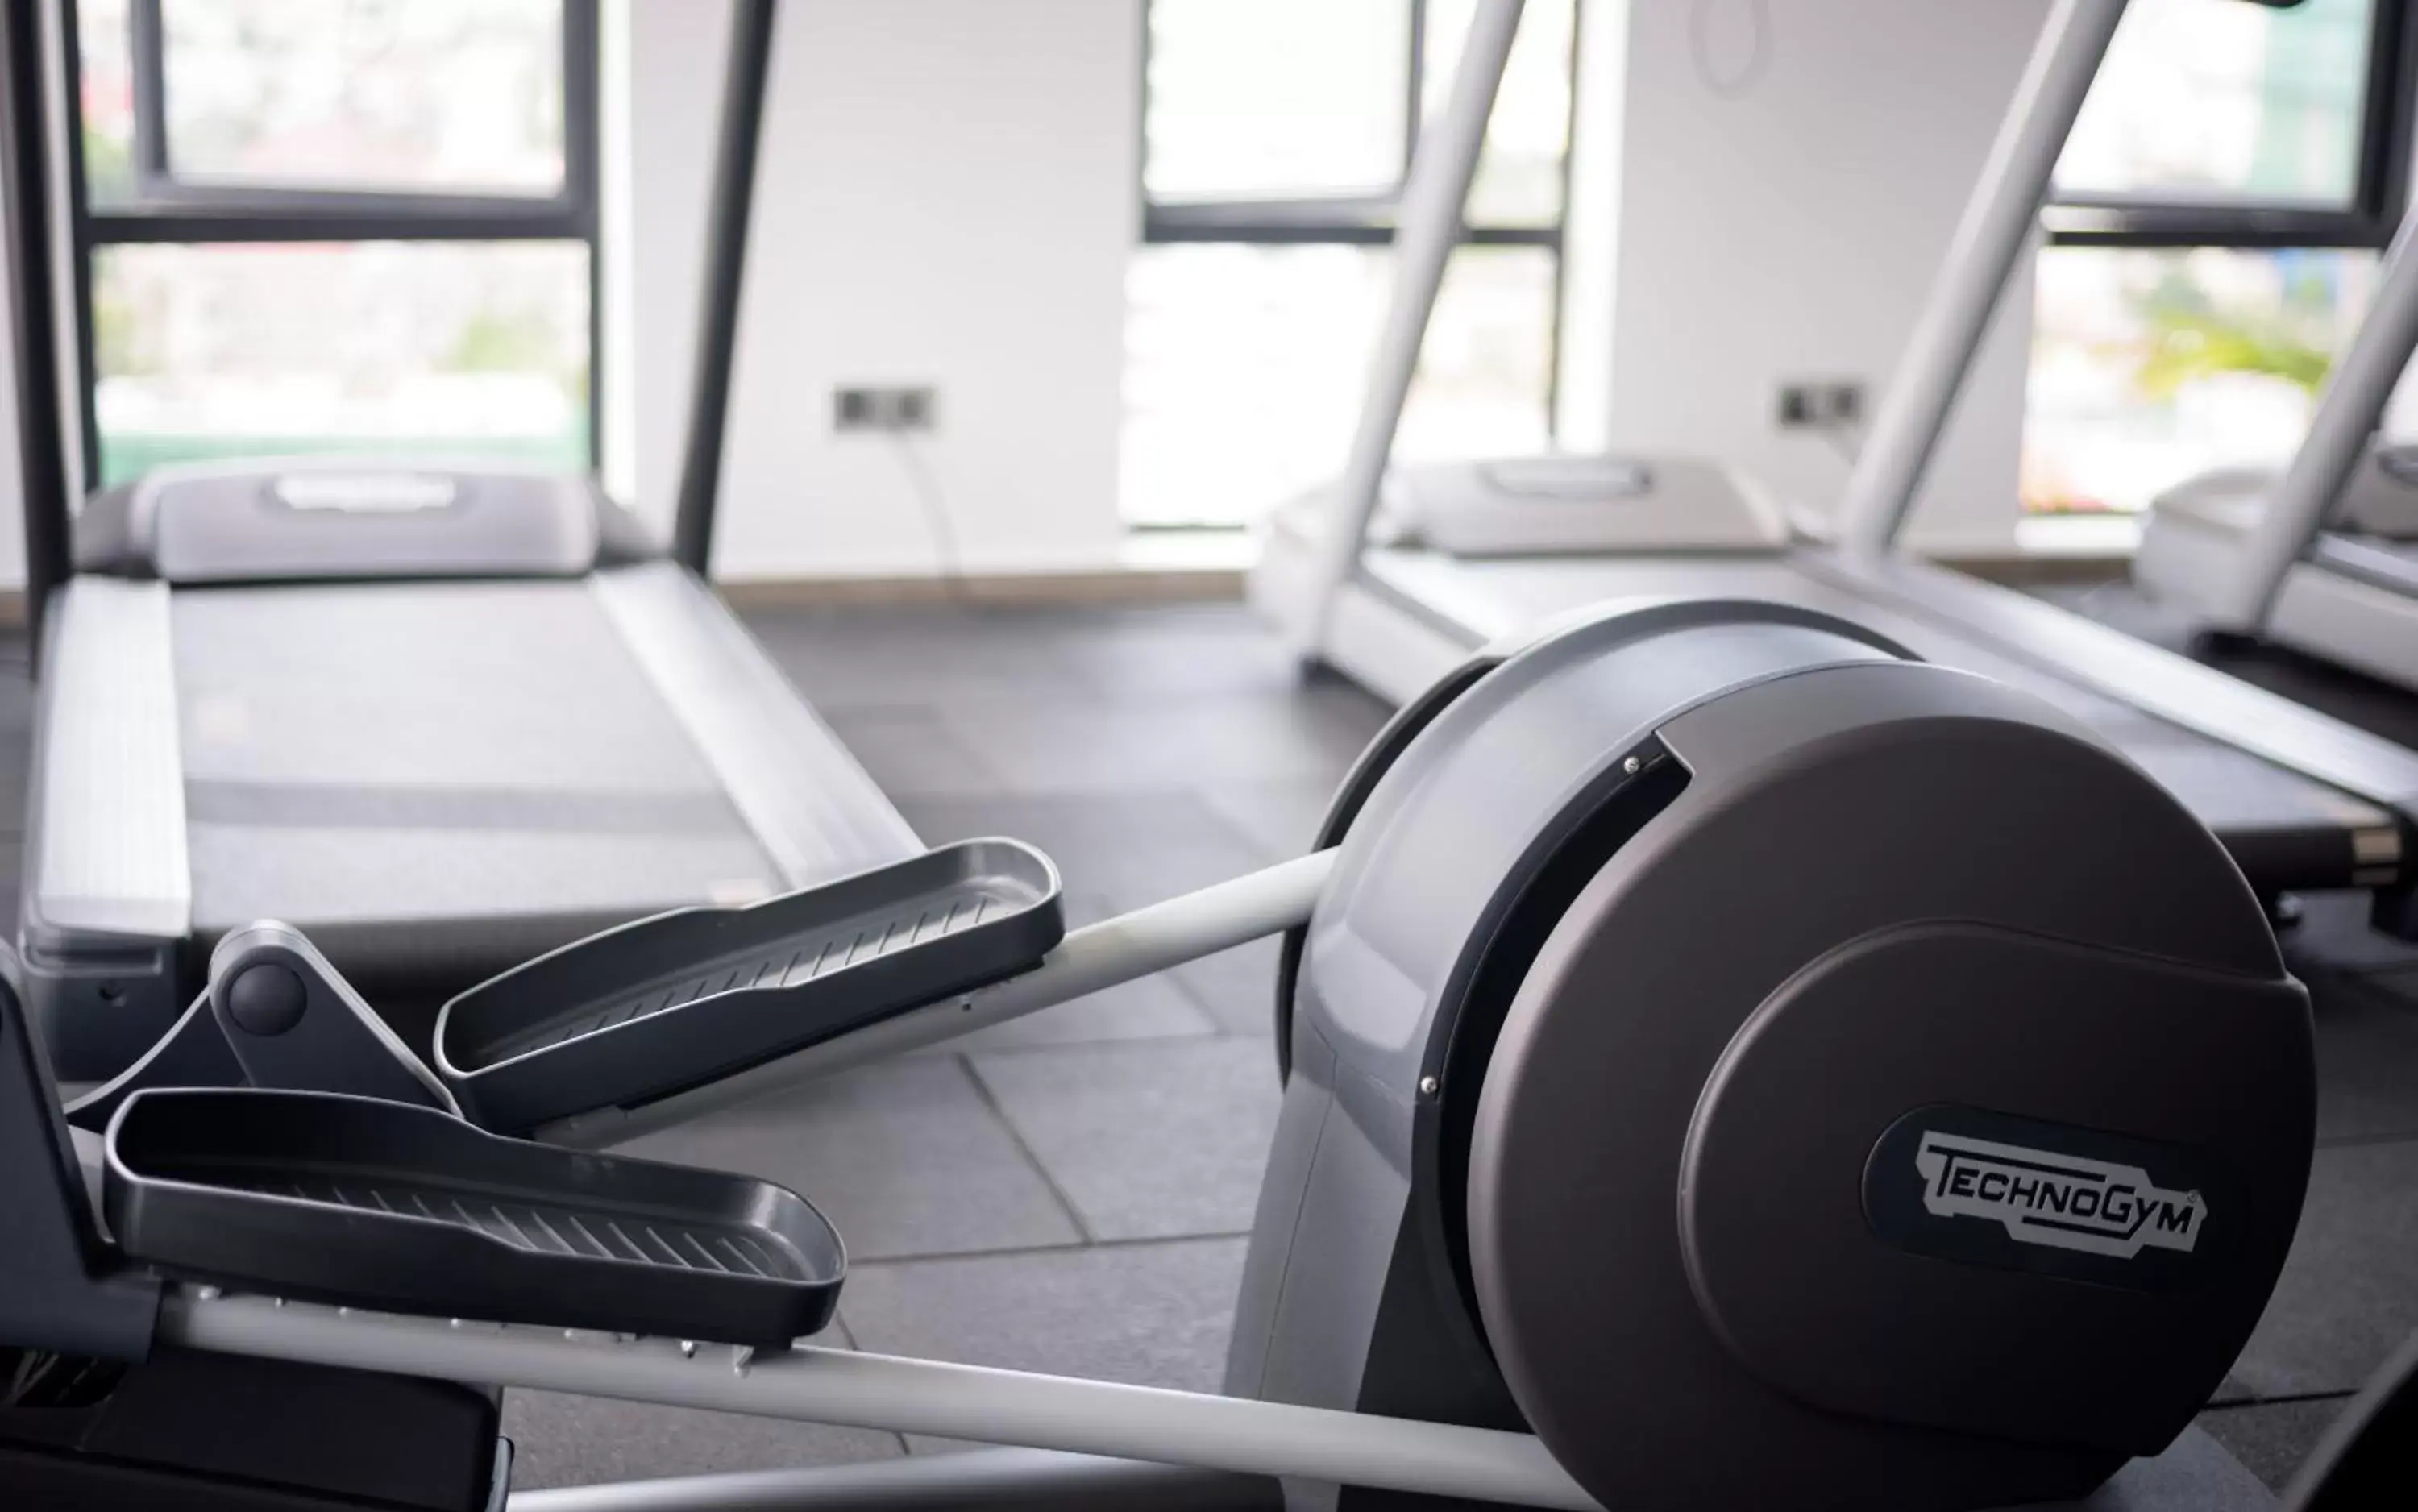 Fitness centre/facilities, View in Mansion 51 Hotel & Apartment